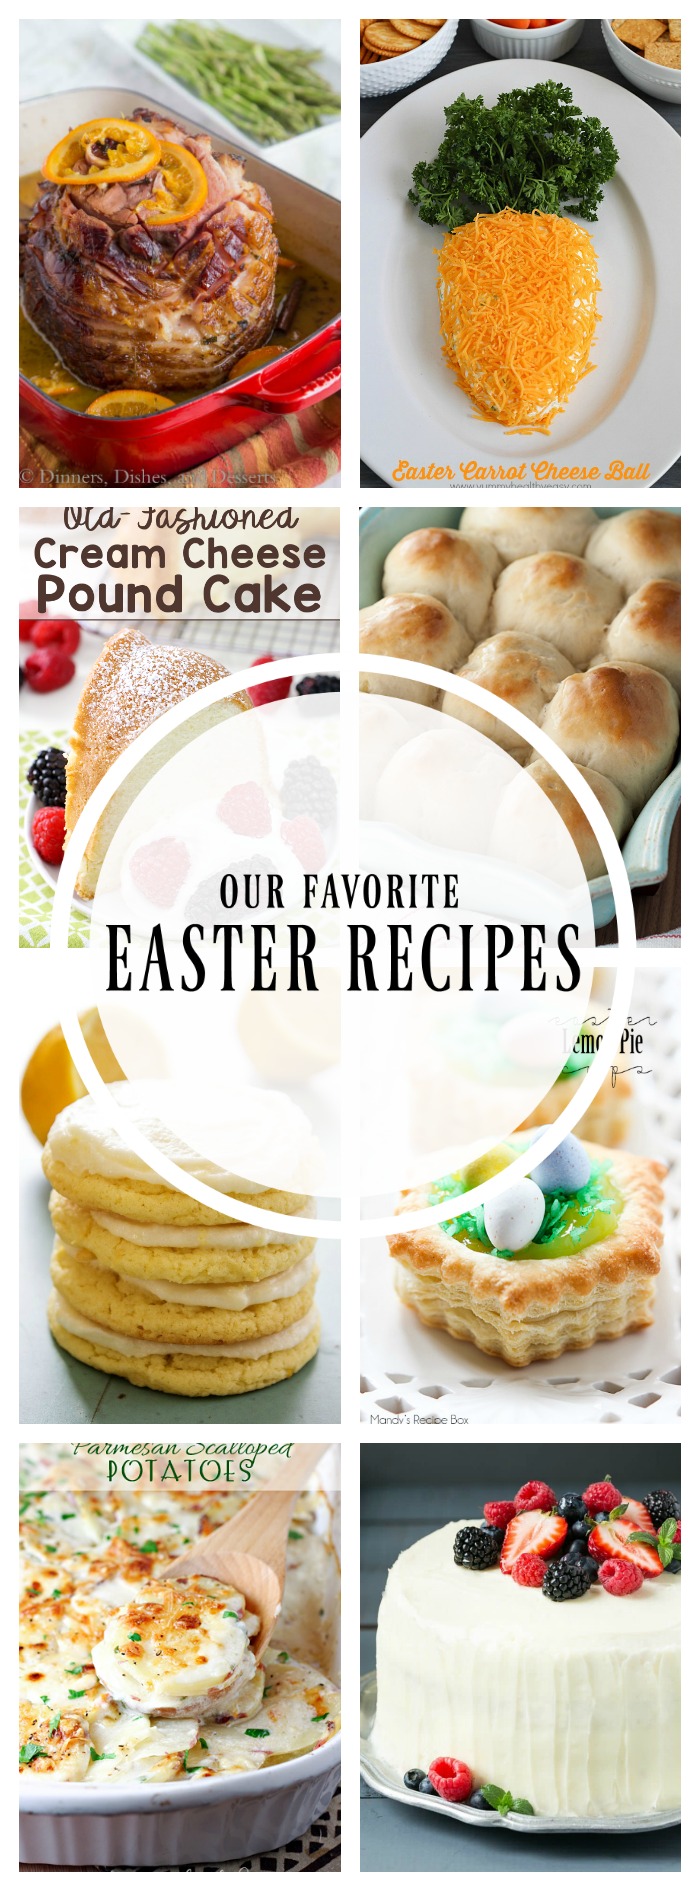 Our Favorite Easter Recipes